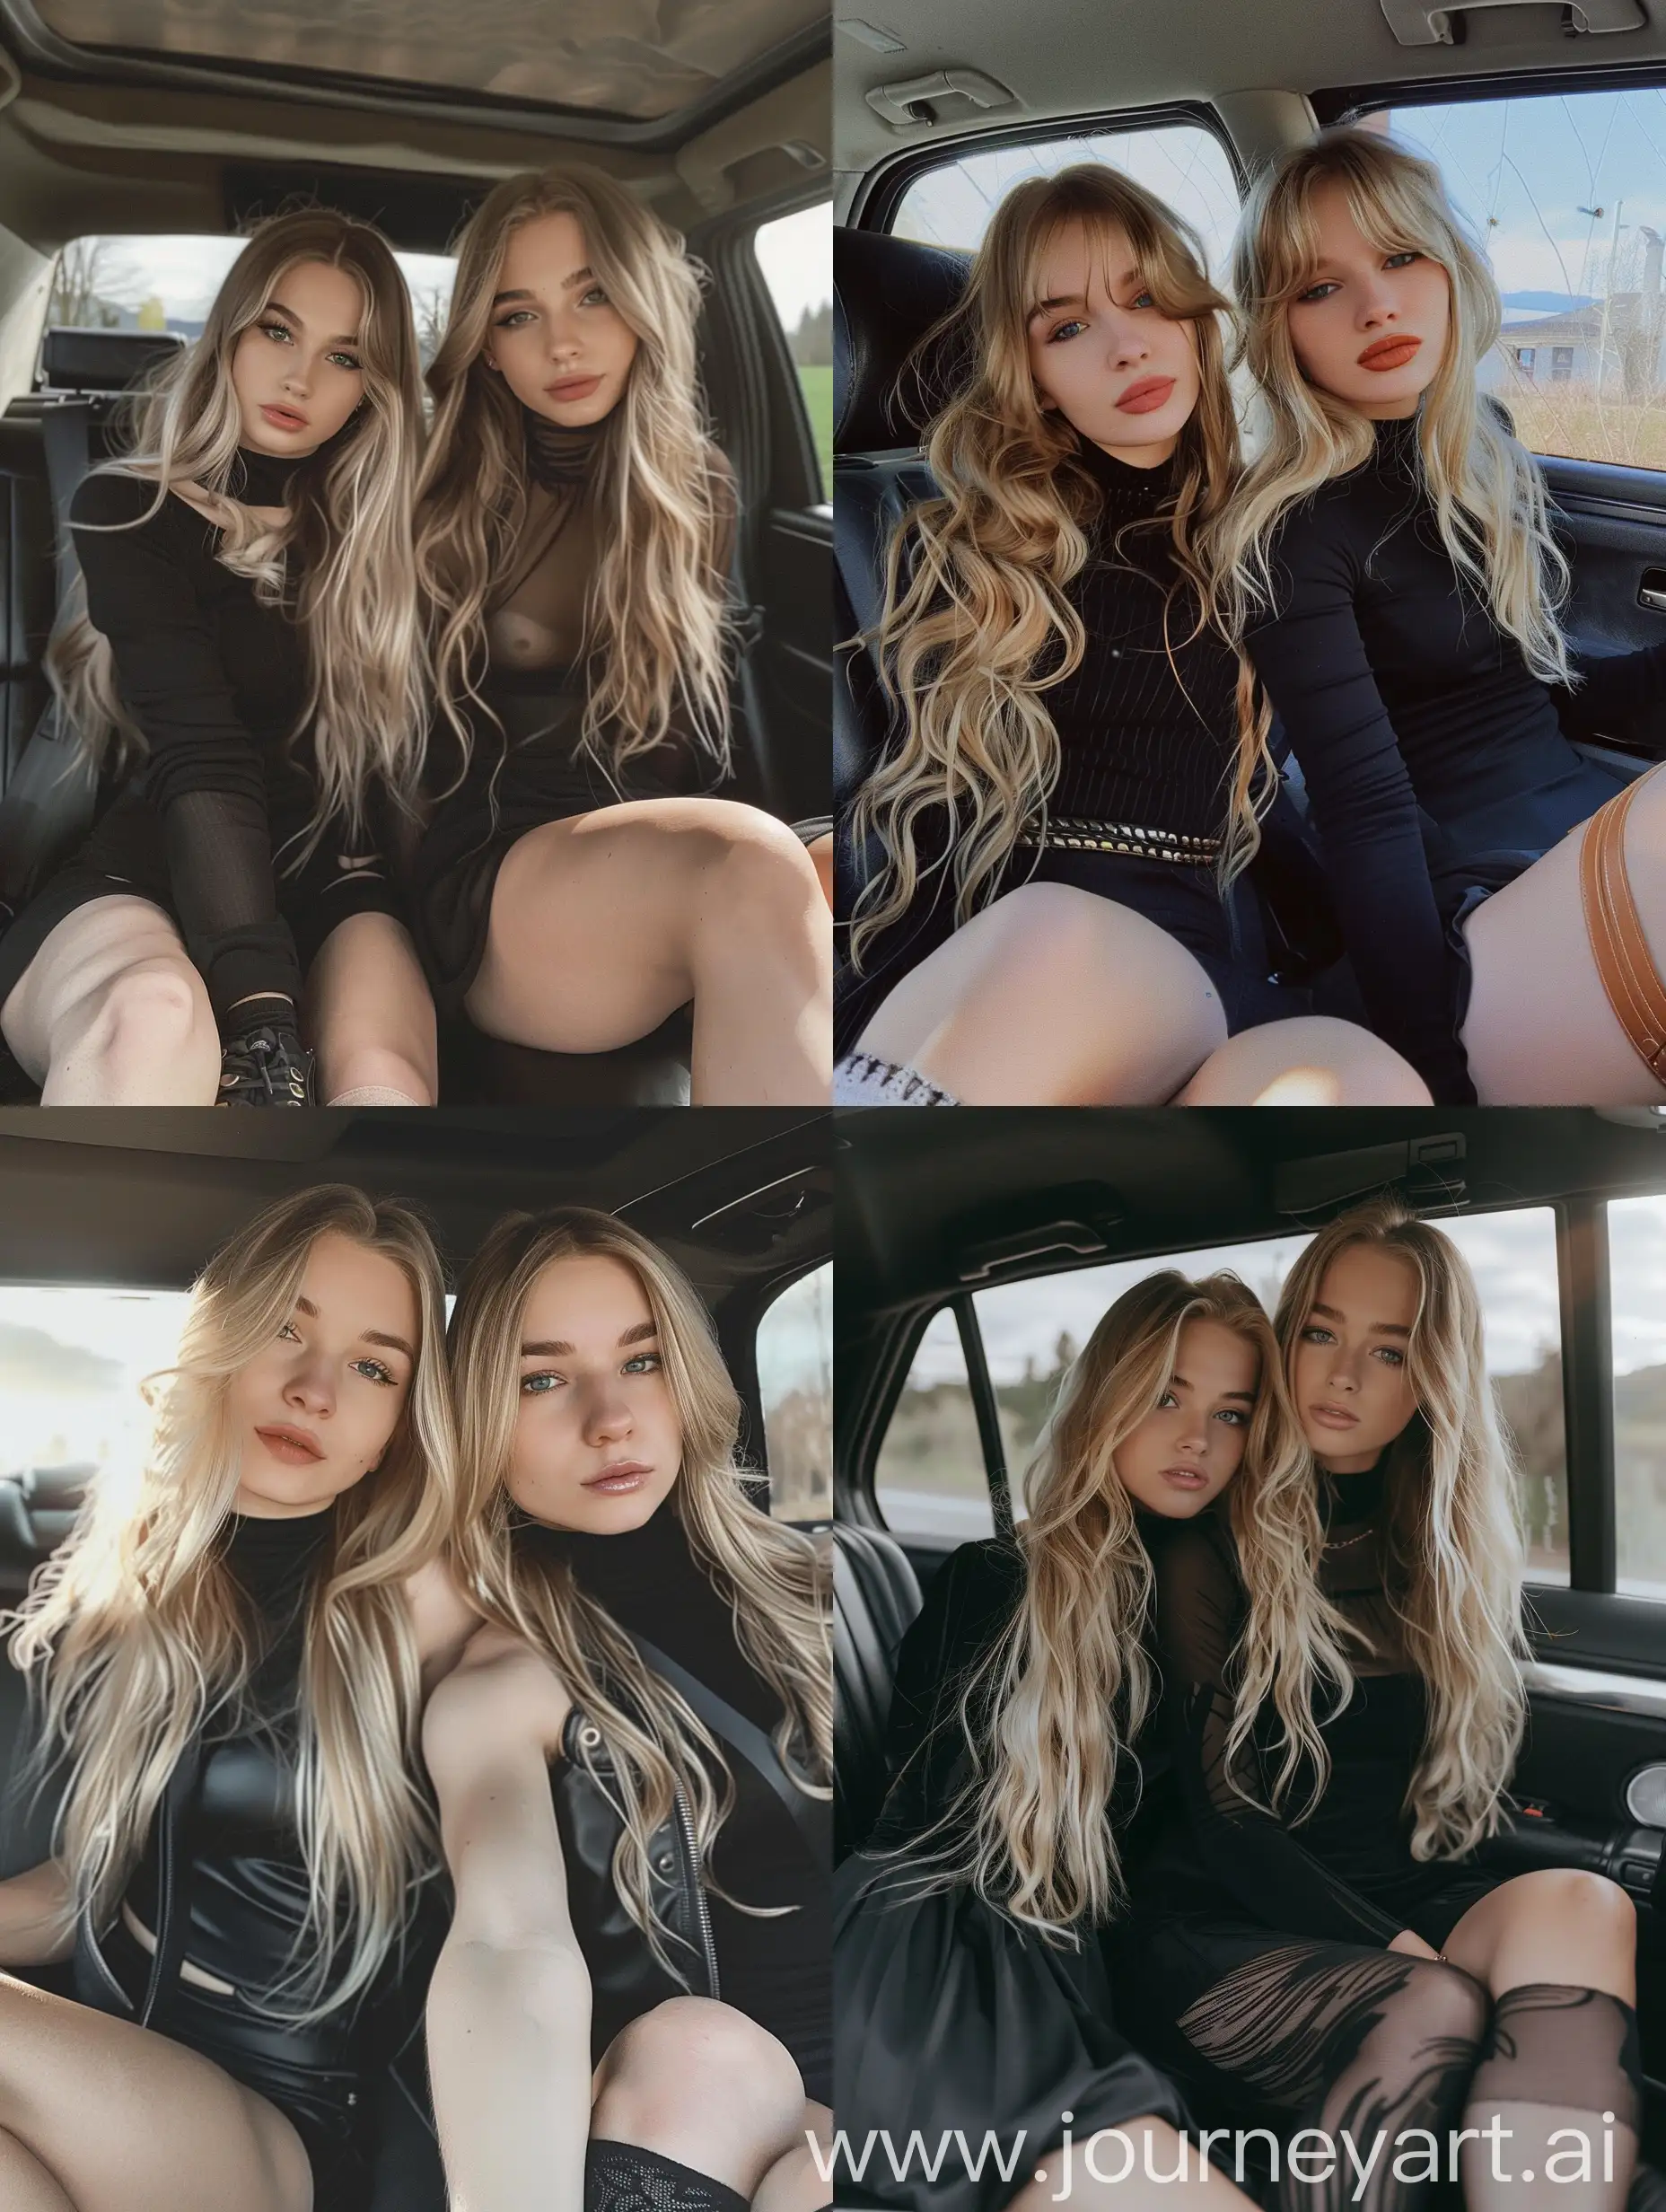 2  girls, long blond hair , 22 years old, inside car,  influencer, beauty ,,  black dress,  , makeup,, sitting on car , socks and boots, no effect, selfie , iphone selfie, no filters , iphone photo natural